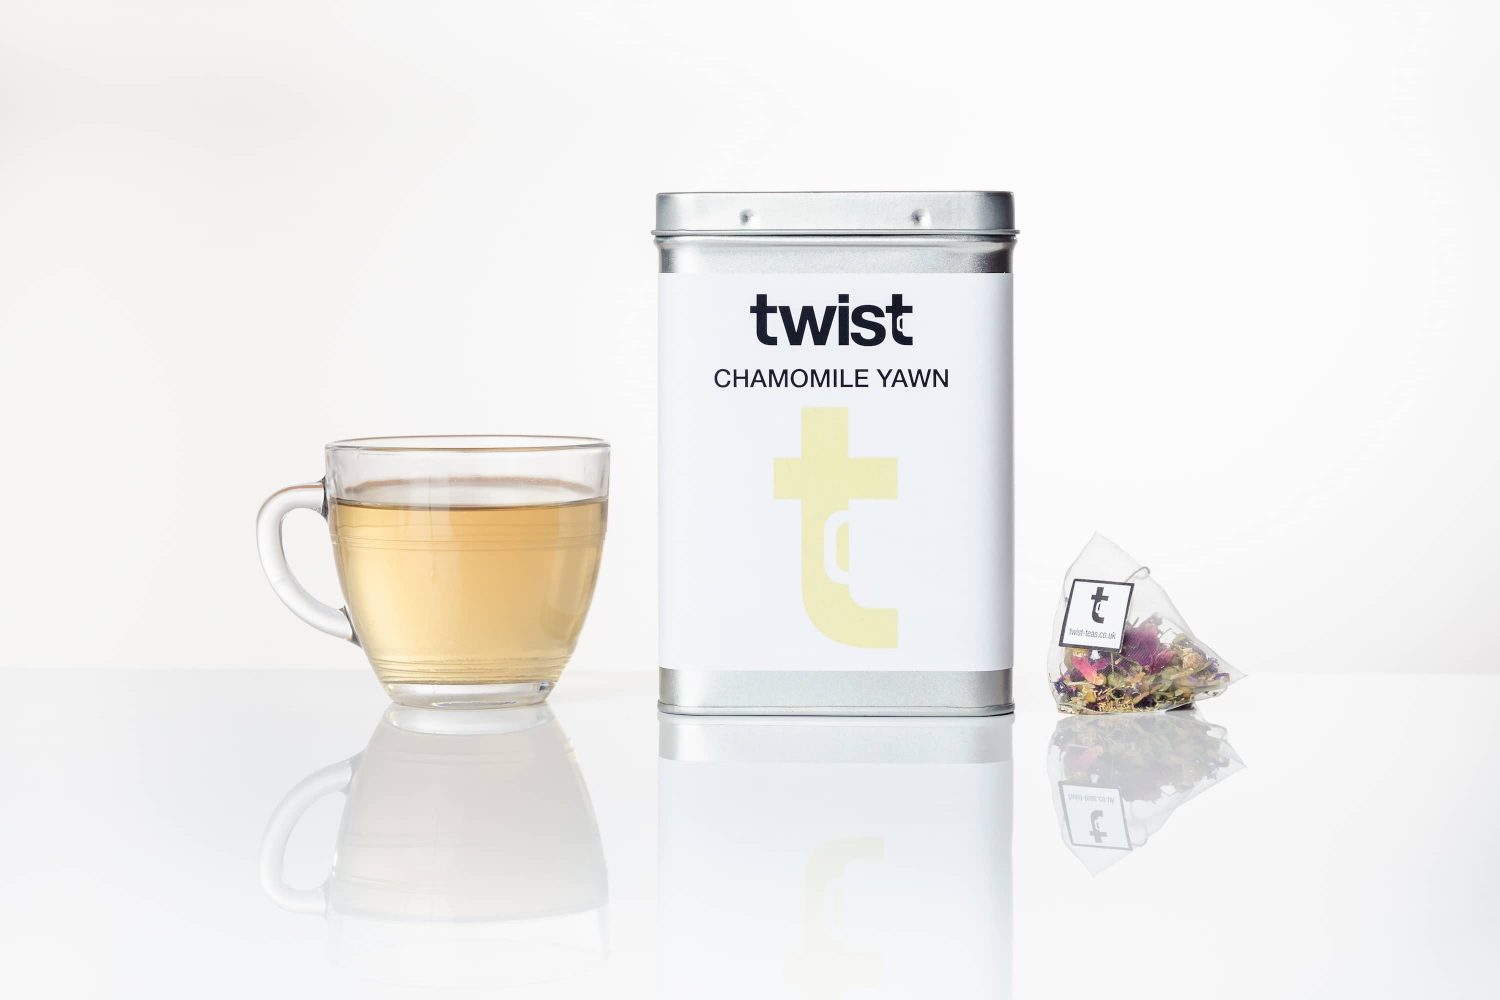 A caddy of Twist Teas' recommended  blend Chamomile Yawn, and a mug of the tea next to it.